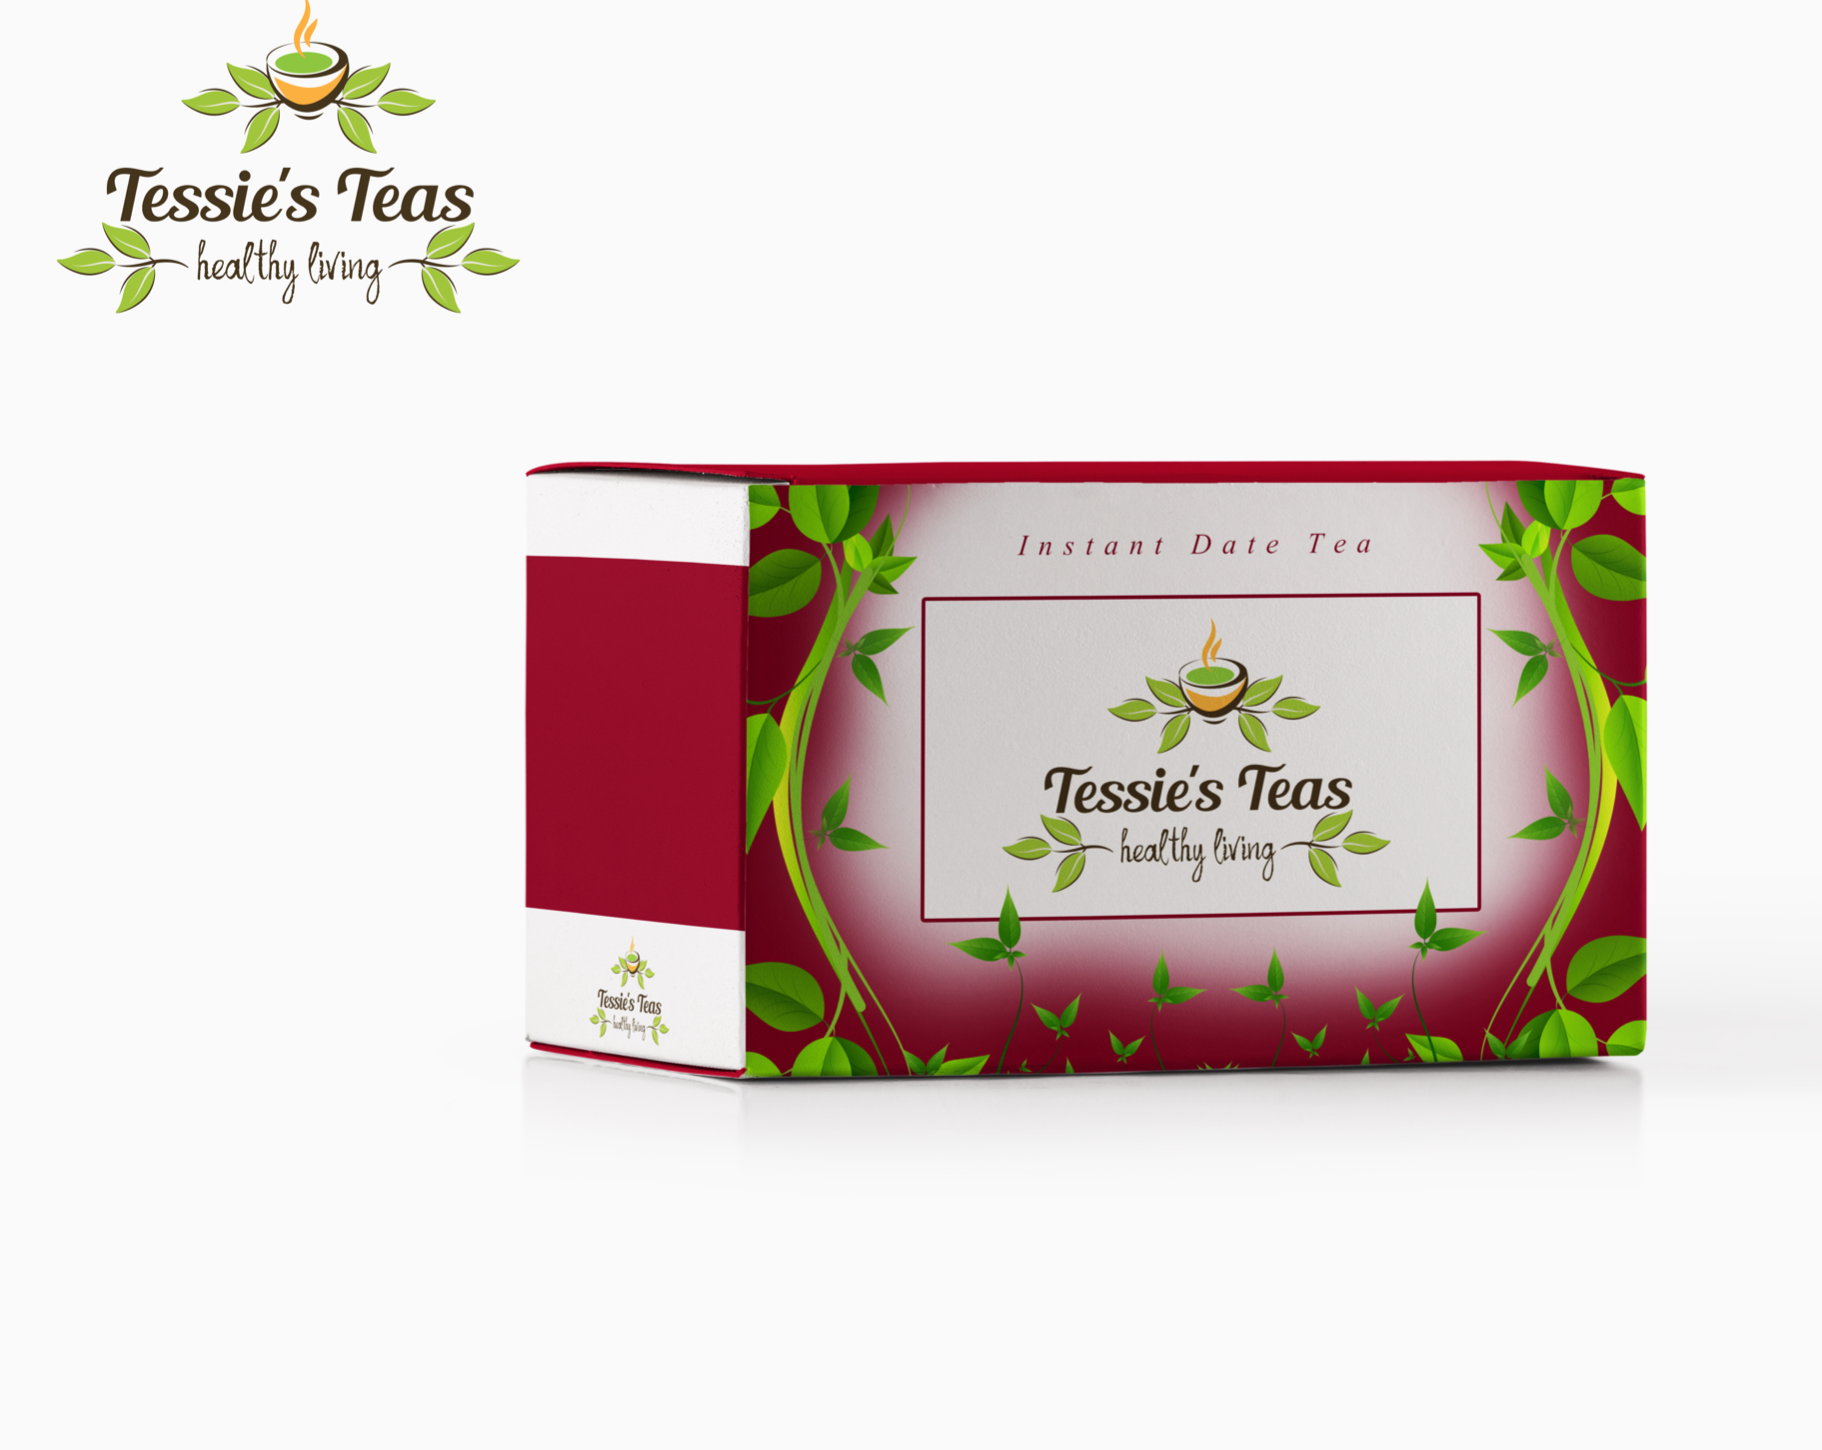 Tessie's Monthly Tea Club - 2 Premium Date Packs (Registered Auto-Ship Subscribers)